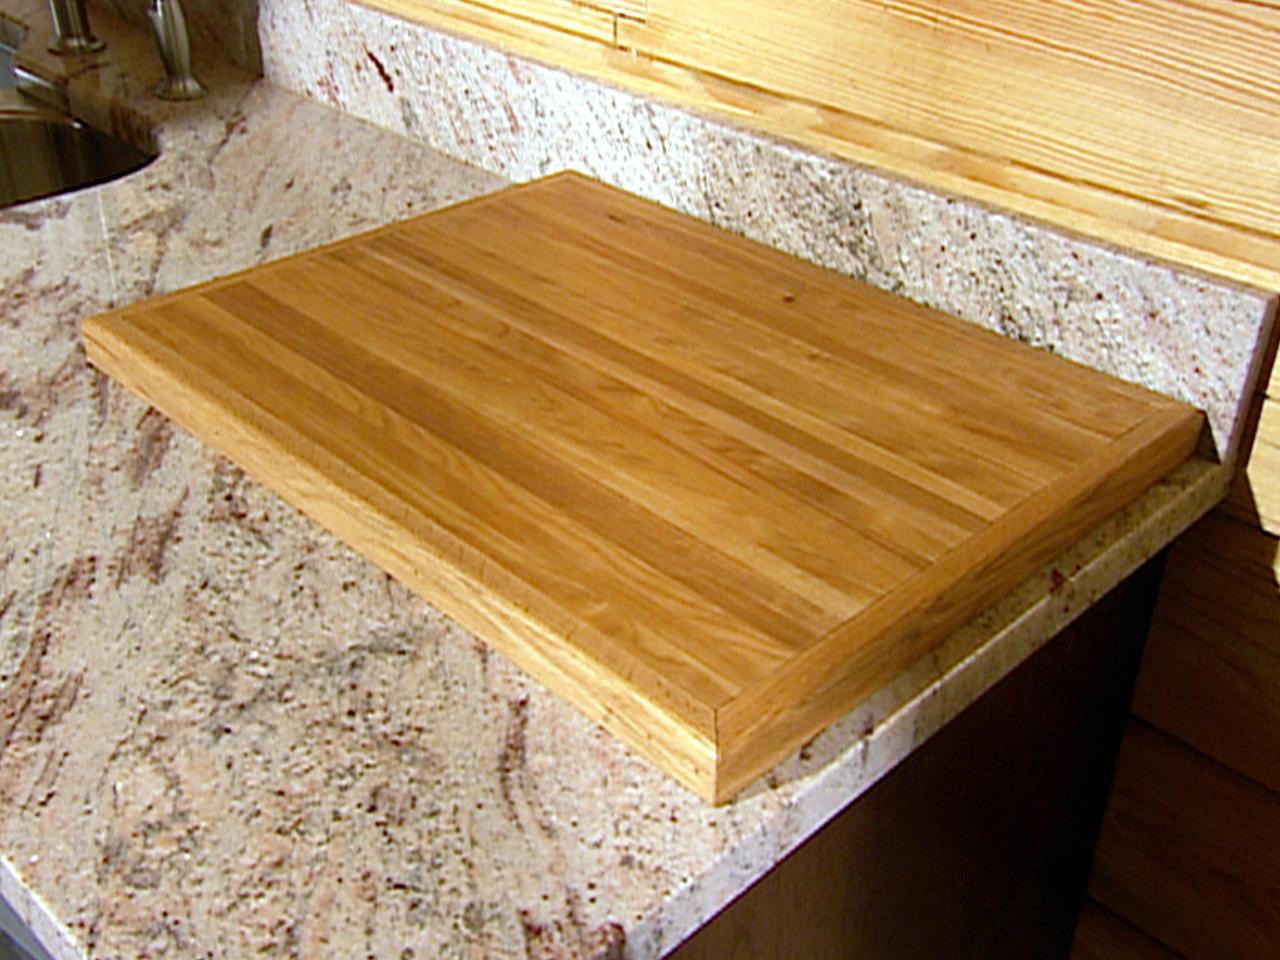 Cutting Board Out Of Reclaimed Wood, Making Hardwood Flooring